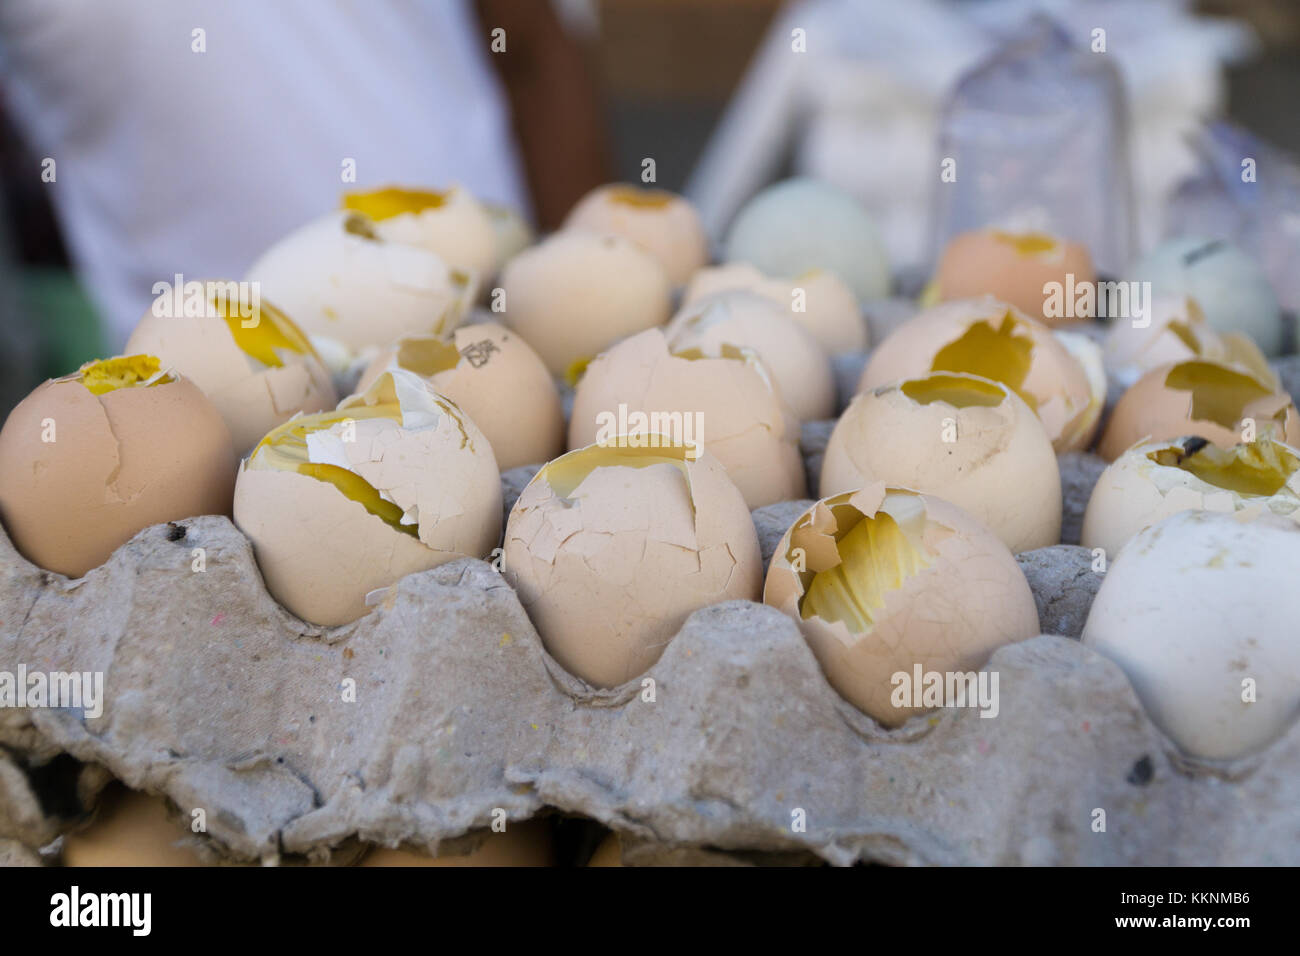 Common street food in the Philippines Balut,a boiled 15 day fertilized Duck embryo. Stock Photo